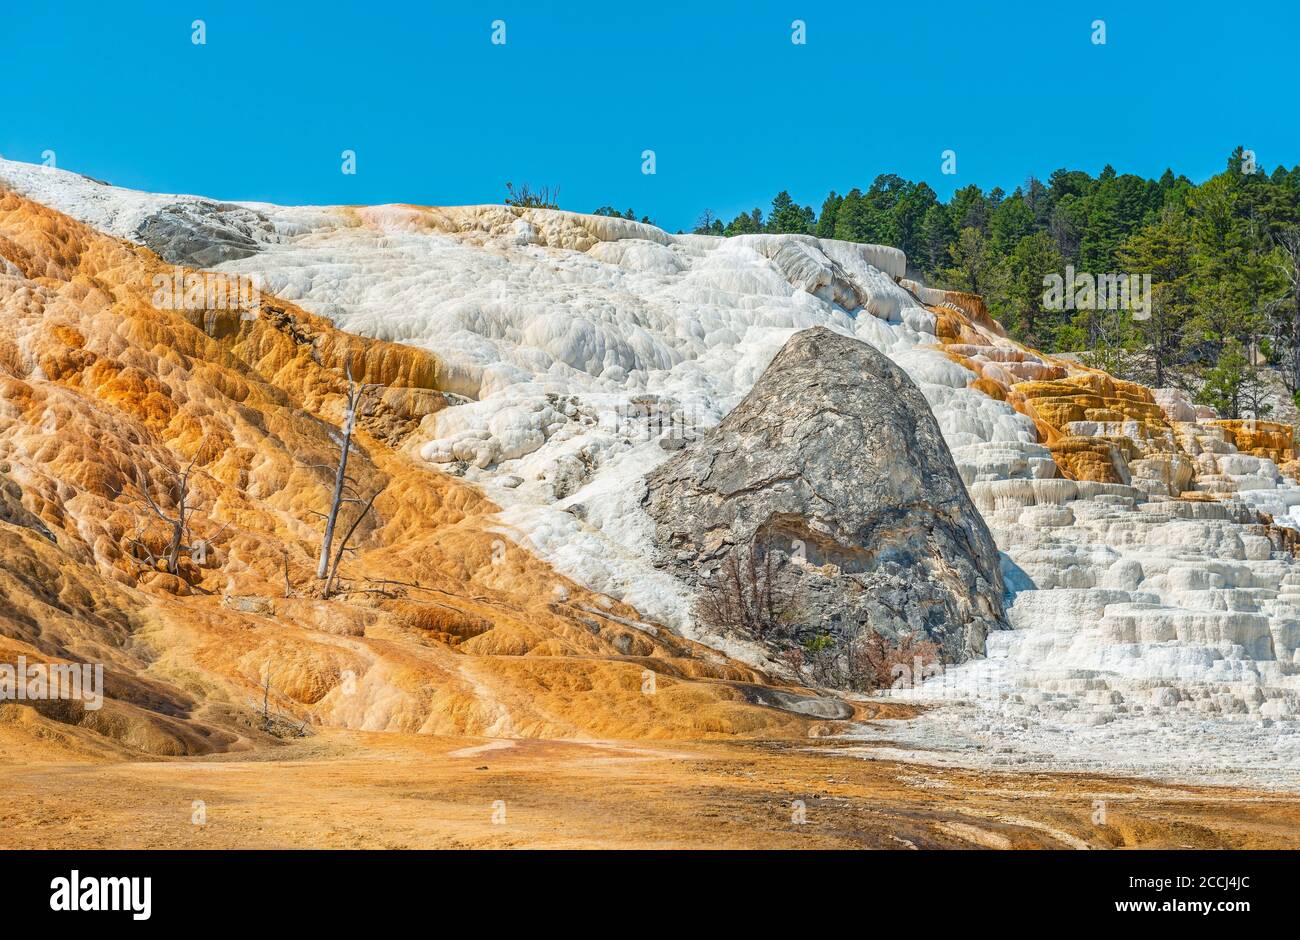 Mammoth Hot Springs landscape, Yellowstone national park, Wyoming, USA (United States of America). Stock Photo